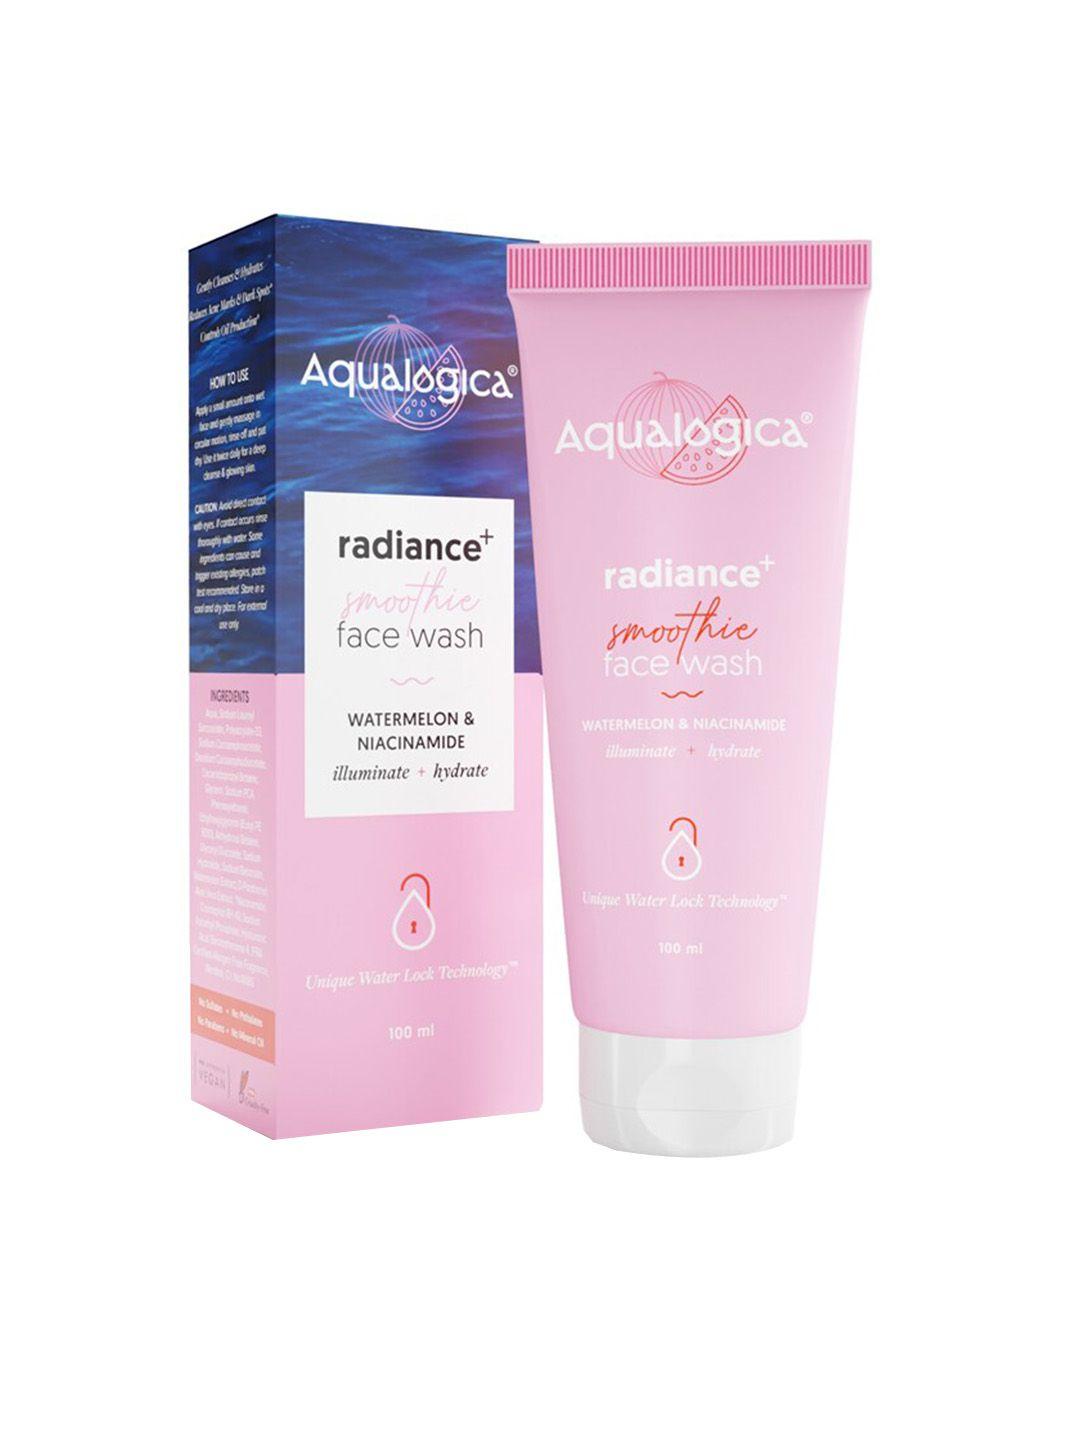 aqualogica pink radiance- smoothie face wash with watermelon & niacinamide 100 ml